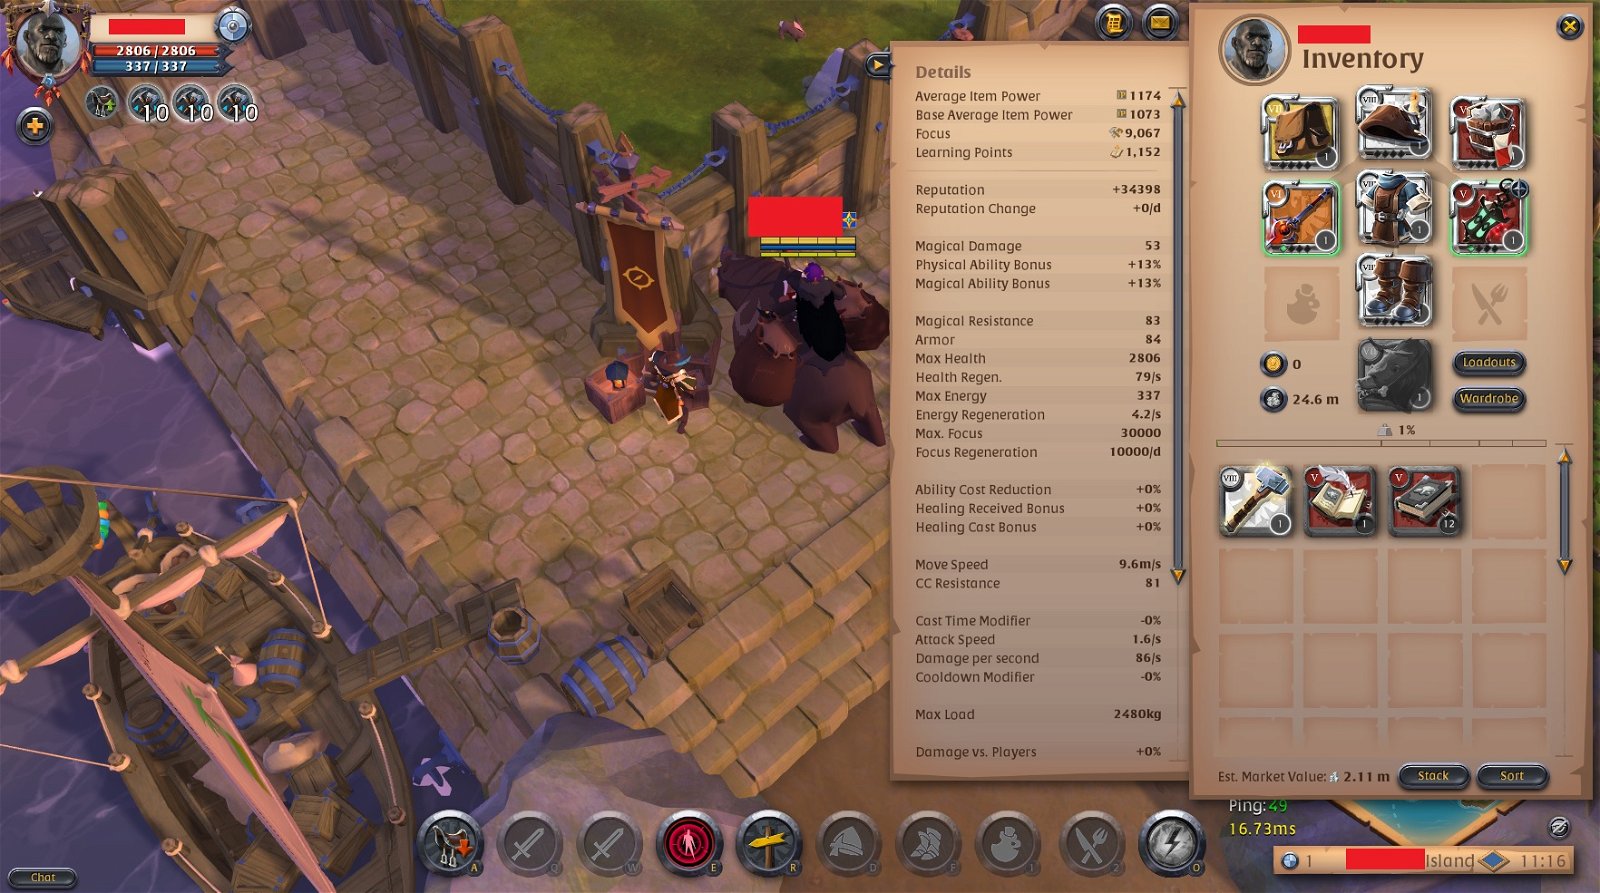 Demonstrable Proof of Zero Tolerance - Catching Gold Sellers - Albion Online  Videos - MMORPG.com — MMORPG.com Forums